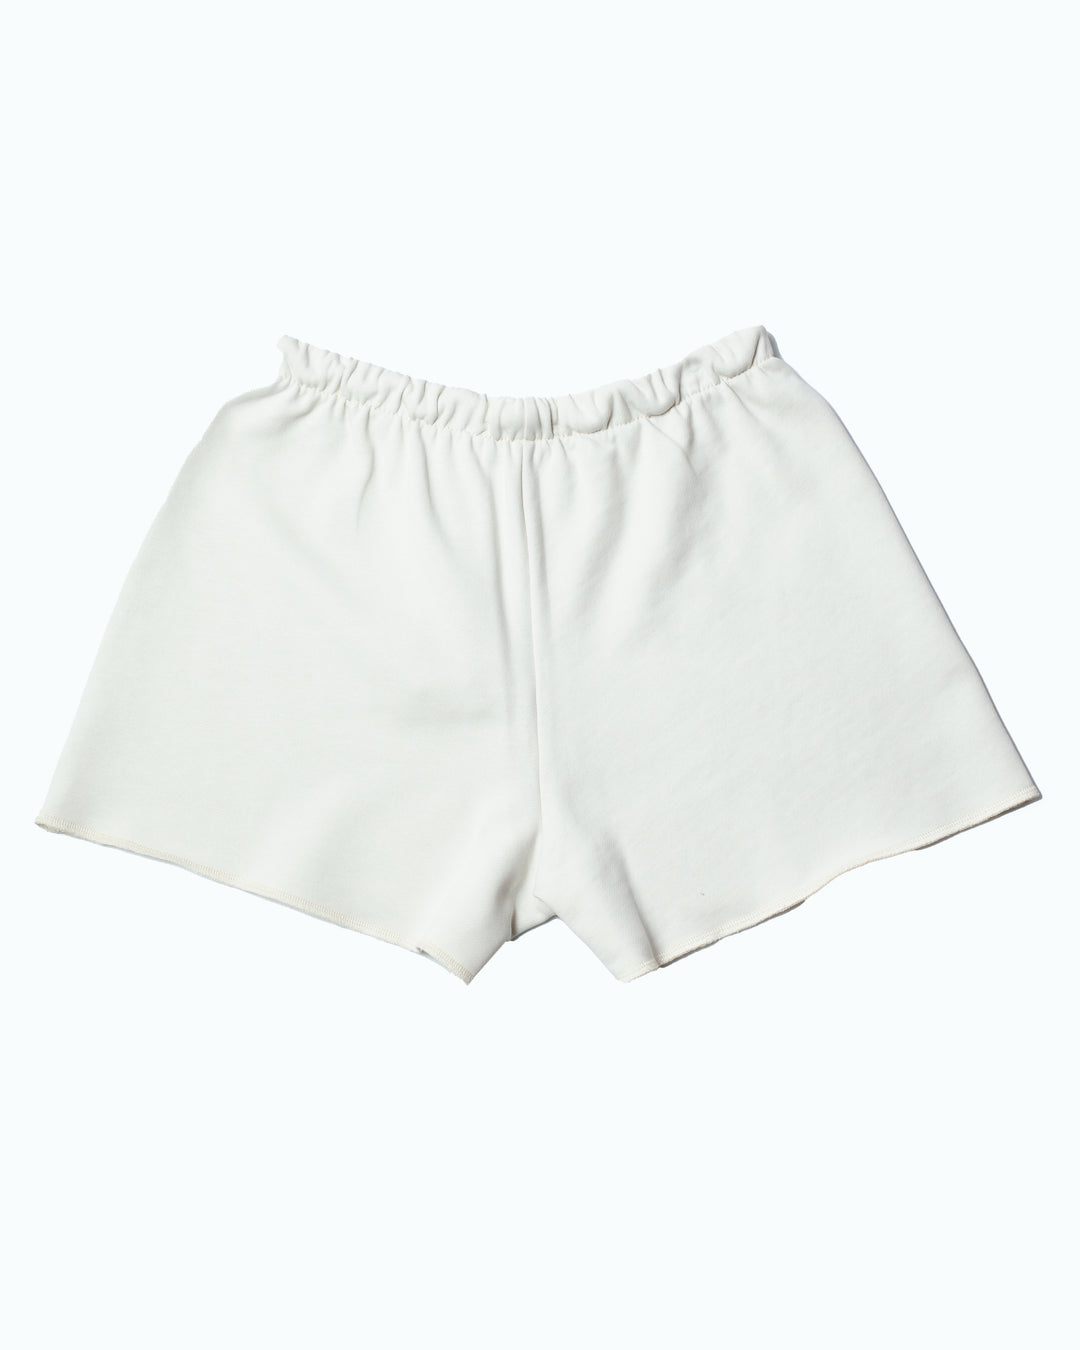 Flared off white short seen from the back.